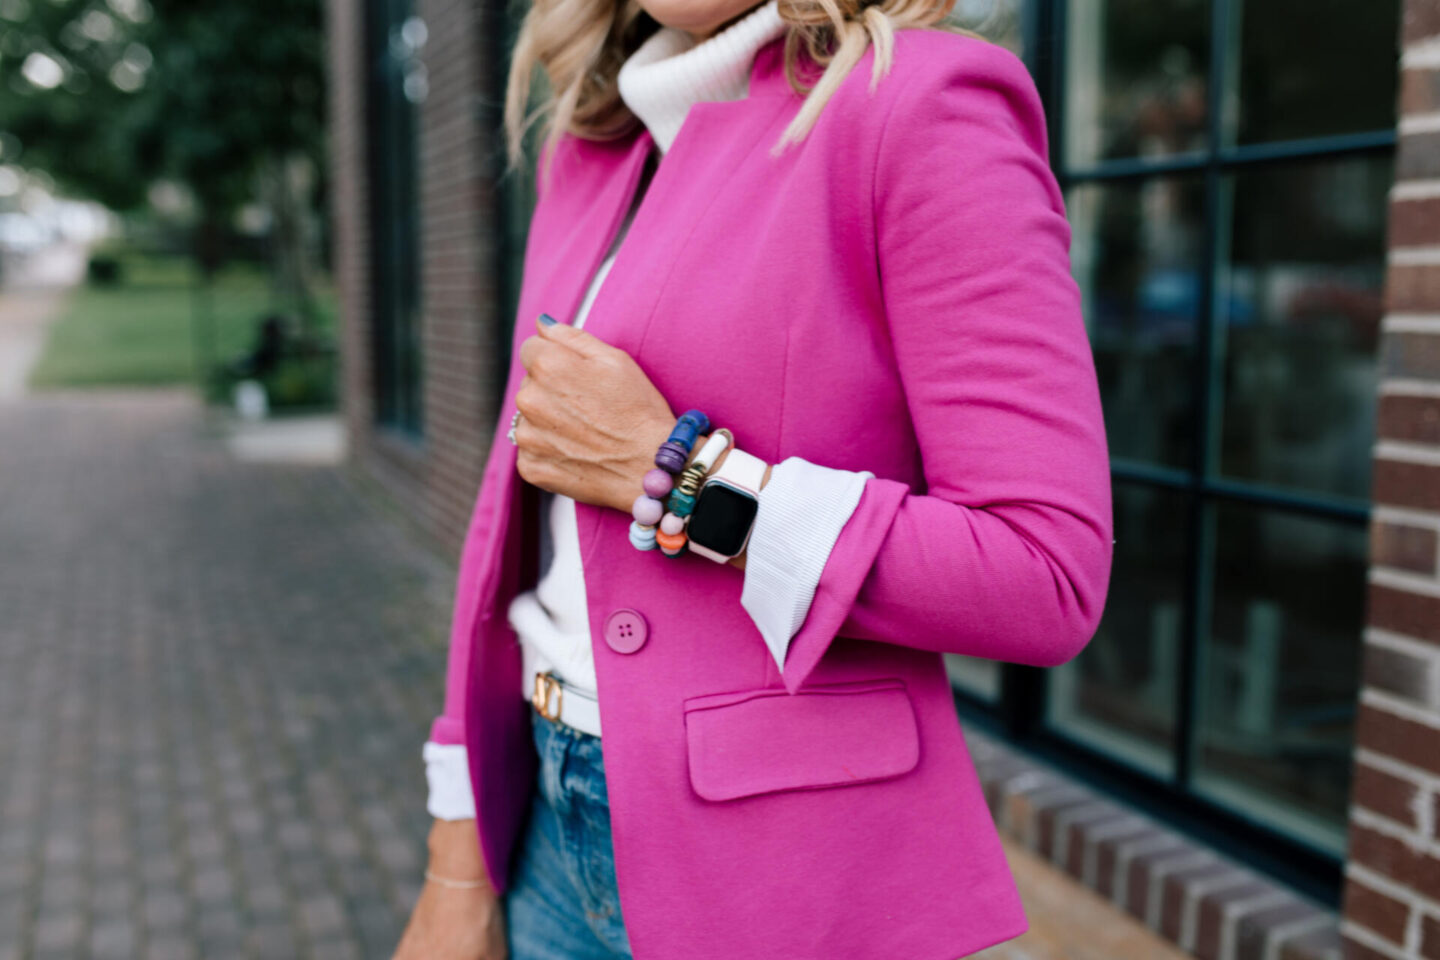 Pink Fashion Favorites for Pinktober featured by top Nashville fashion blogger, Hello Happiness.